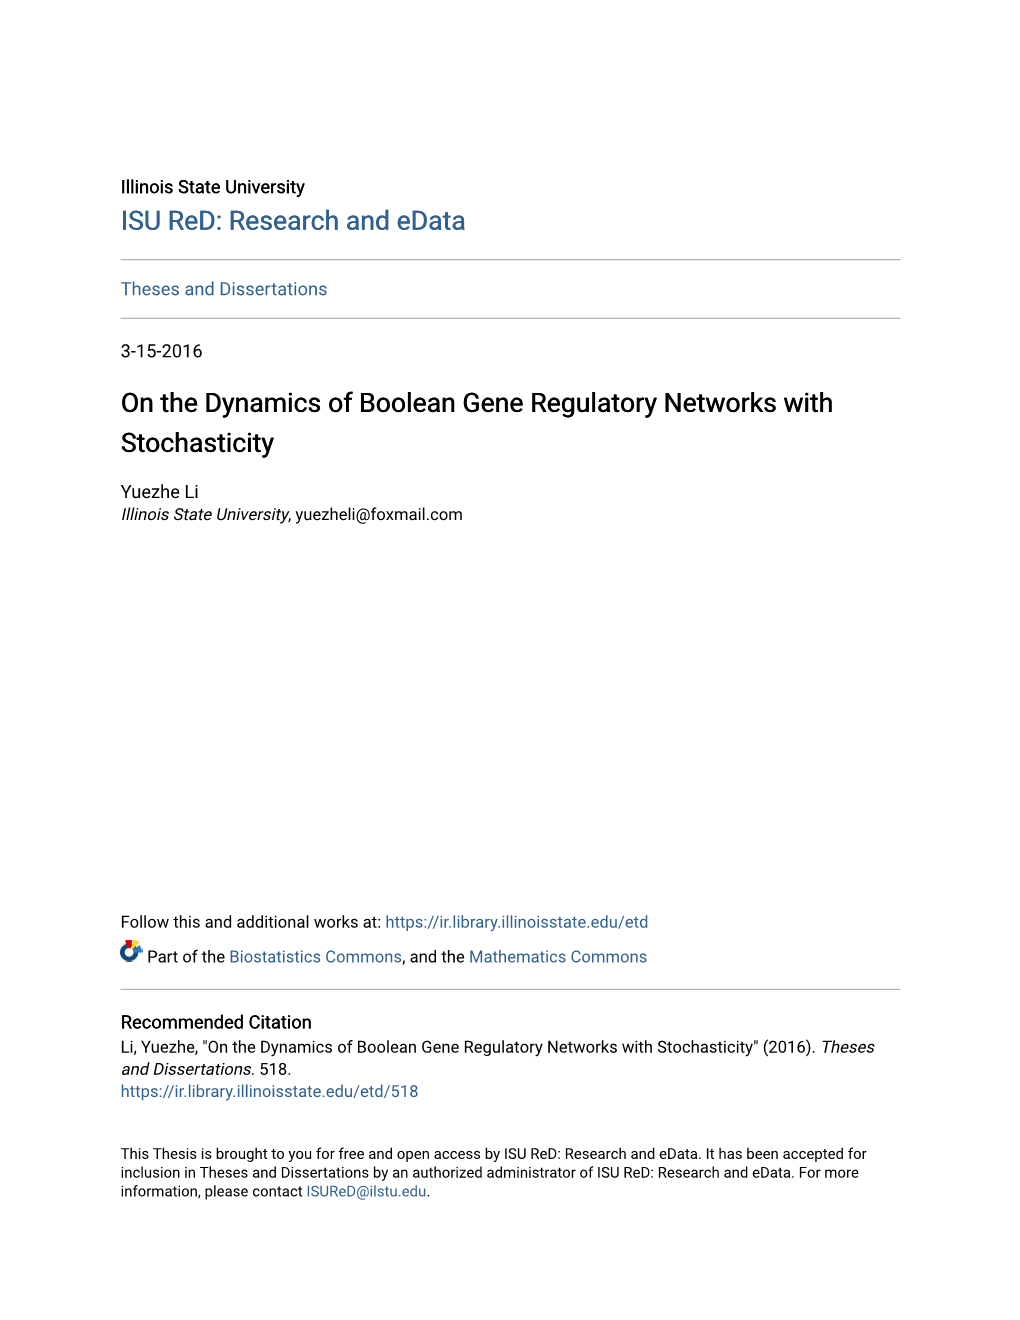 On the Dynamics of Boolean Gene Regulatory Networks with Stochasticity